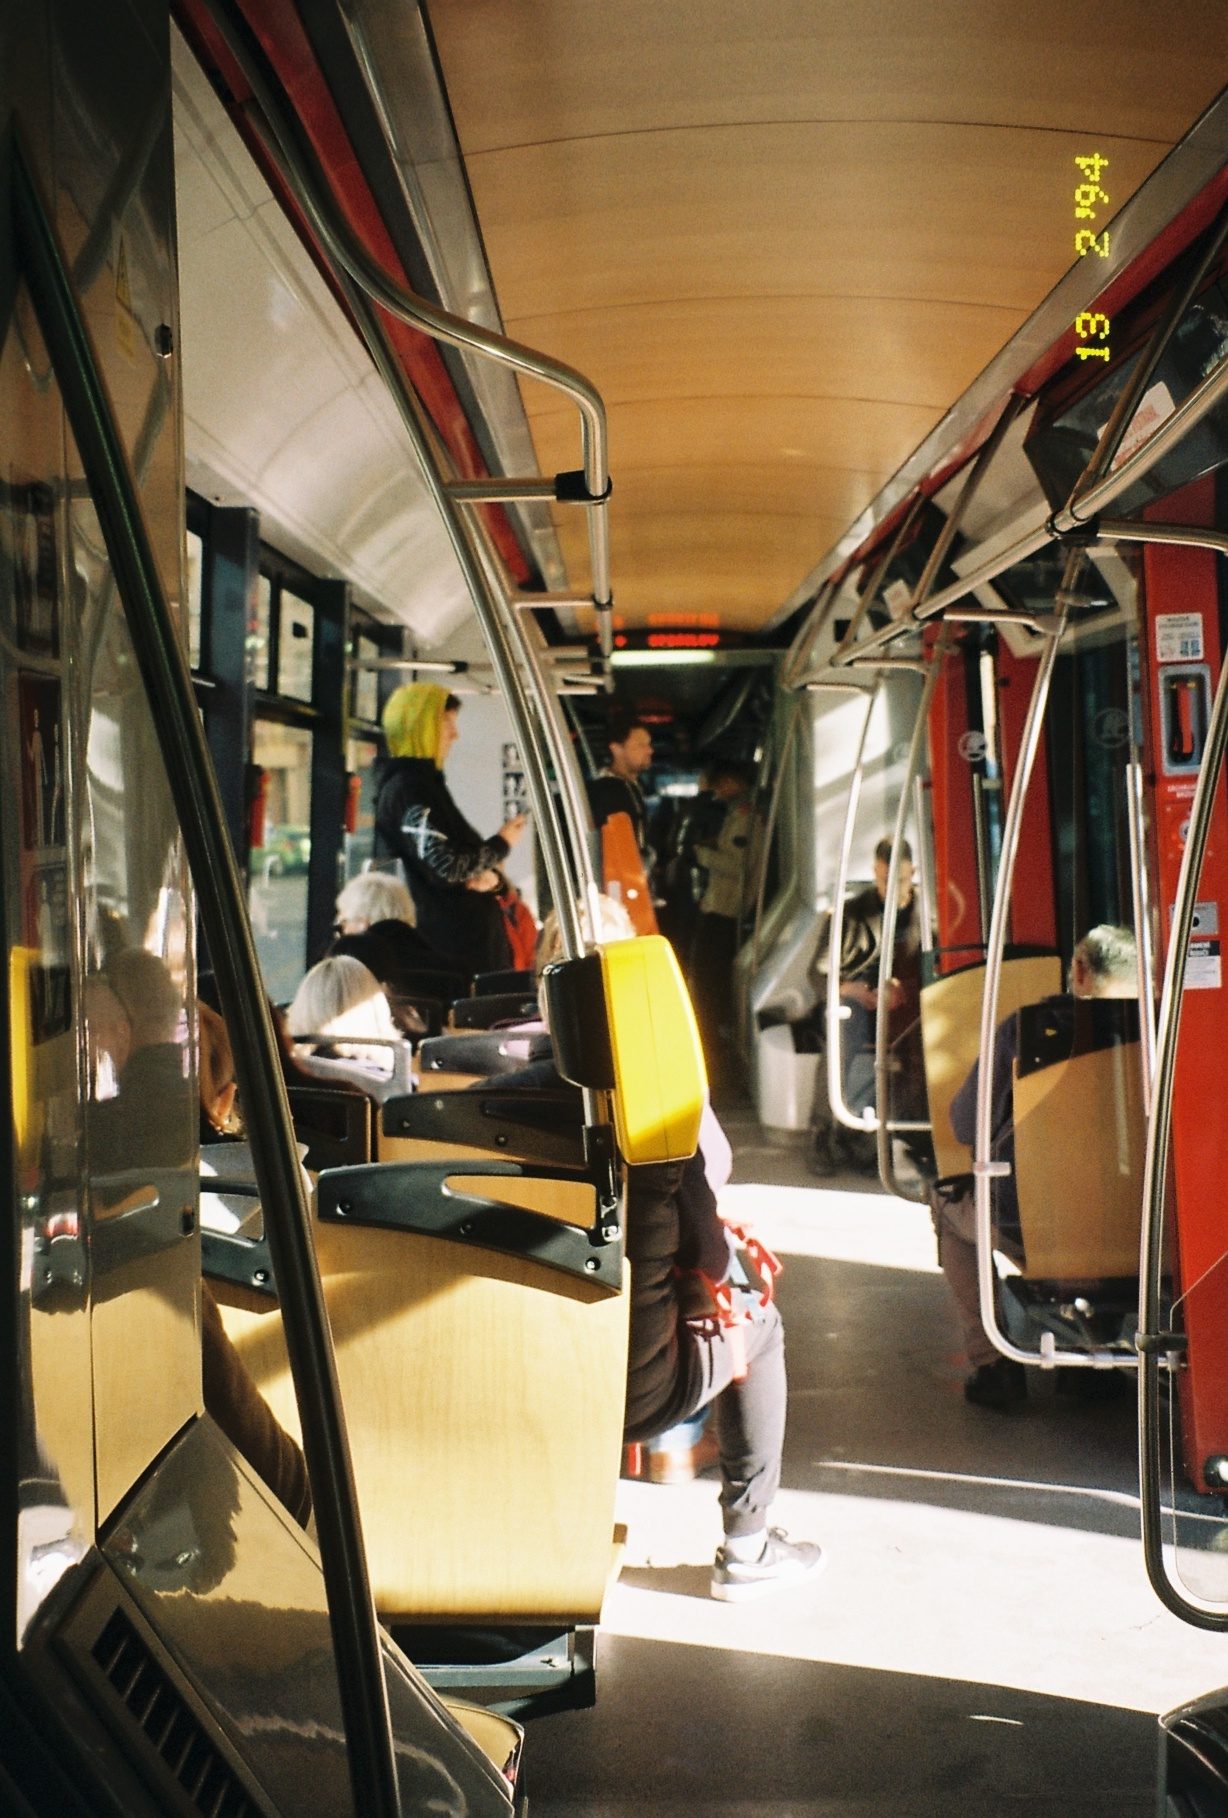 A view from inside a tram.